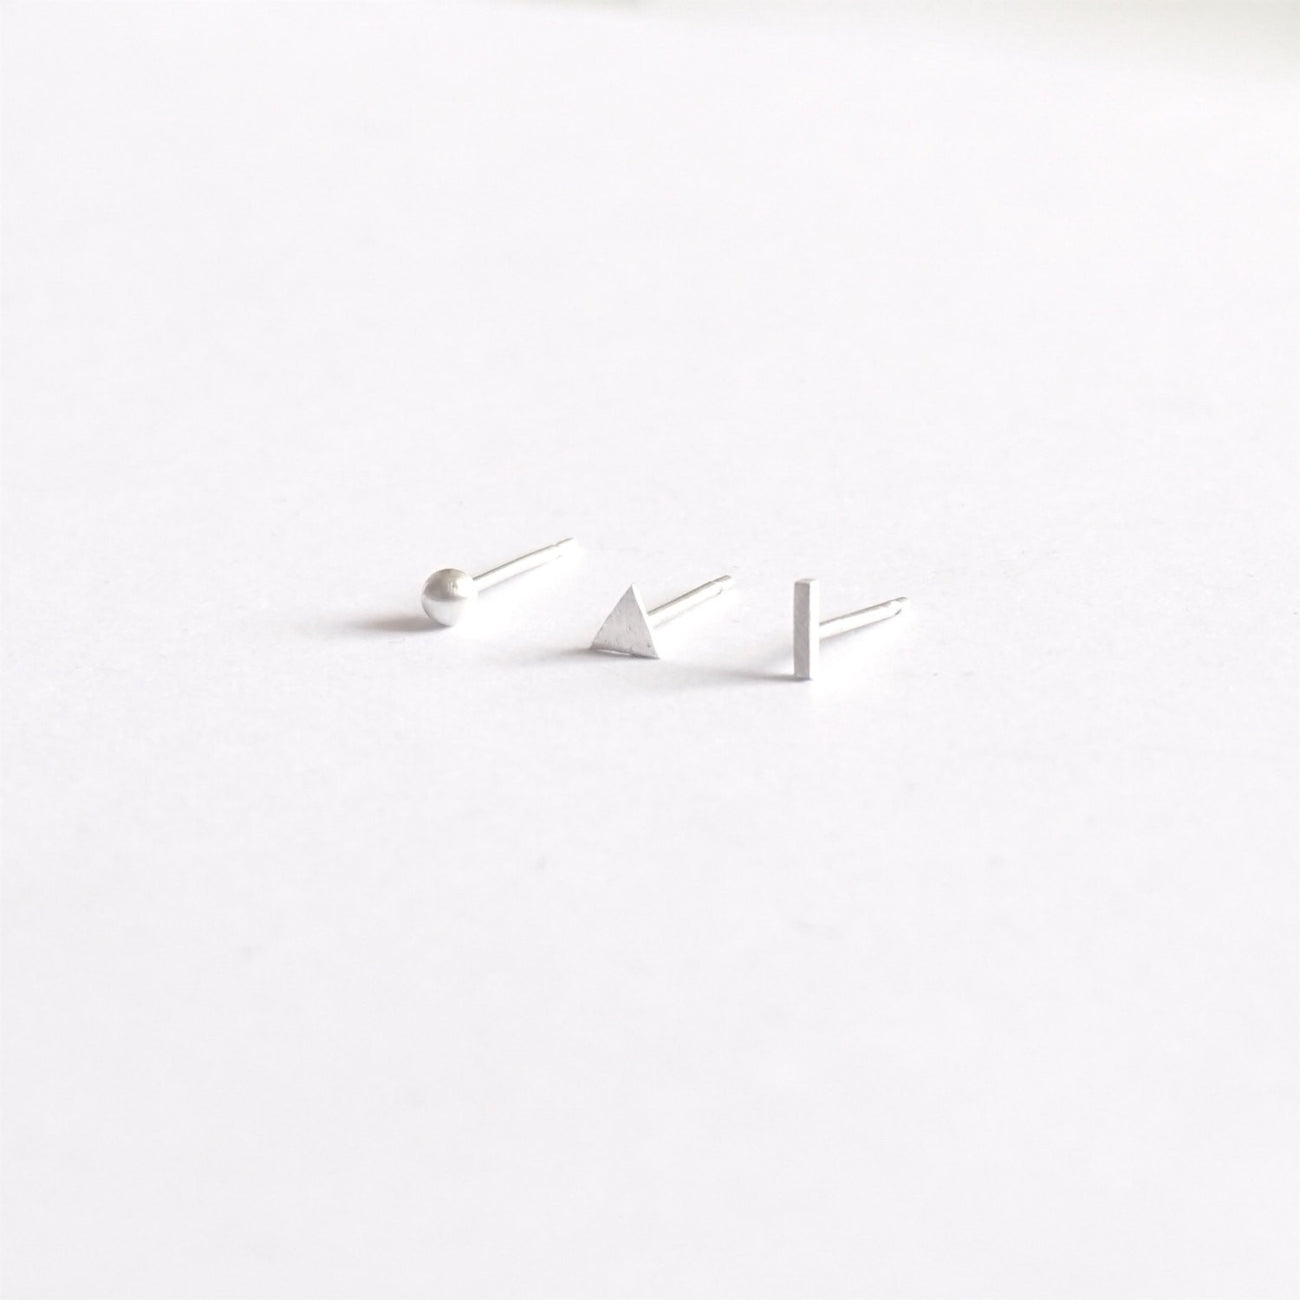 Distinctive and Well Designed Mismatched Stud Earrings - 0219 - Virginia Wynne Designs